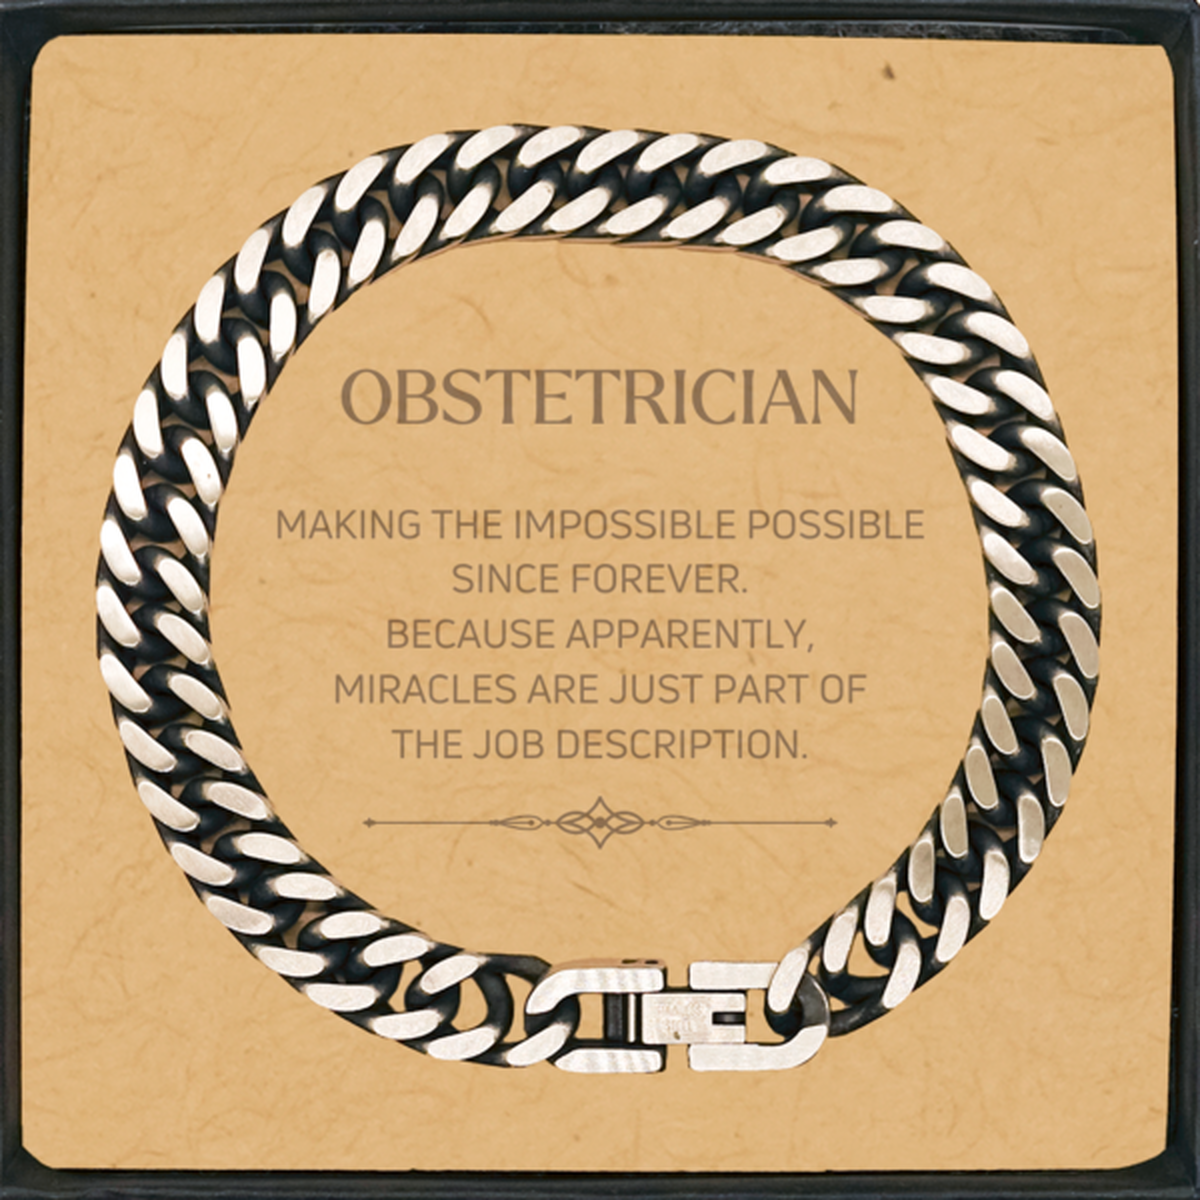 Funny Obstetrician Gifts, Miracles are just part of the job description, Inspirational Birthday Cuban Link Chain Bracelet For Obstetrician, Men, Women, Coworkers, Friends, Boss